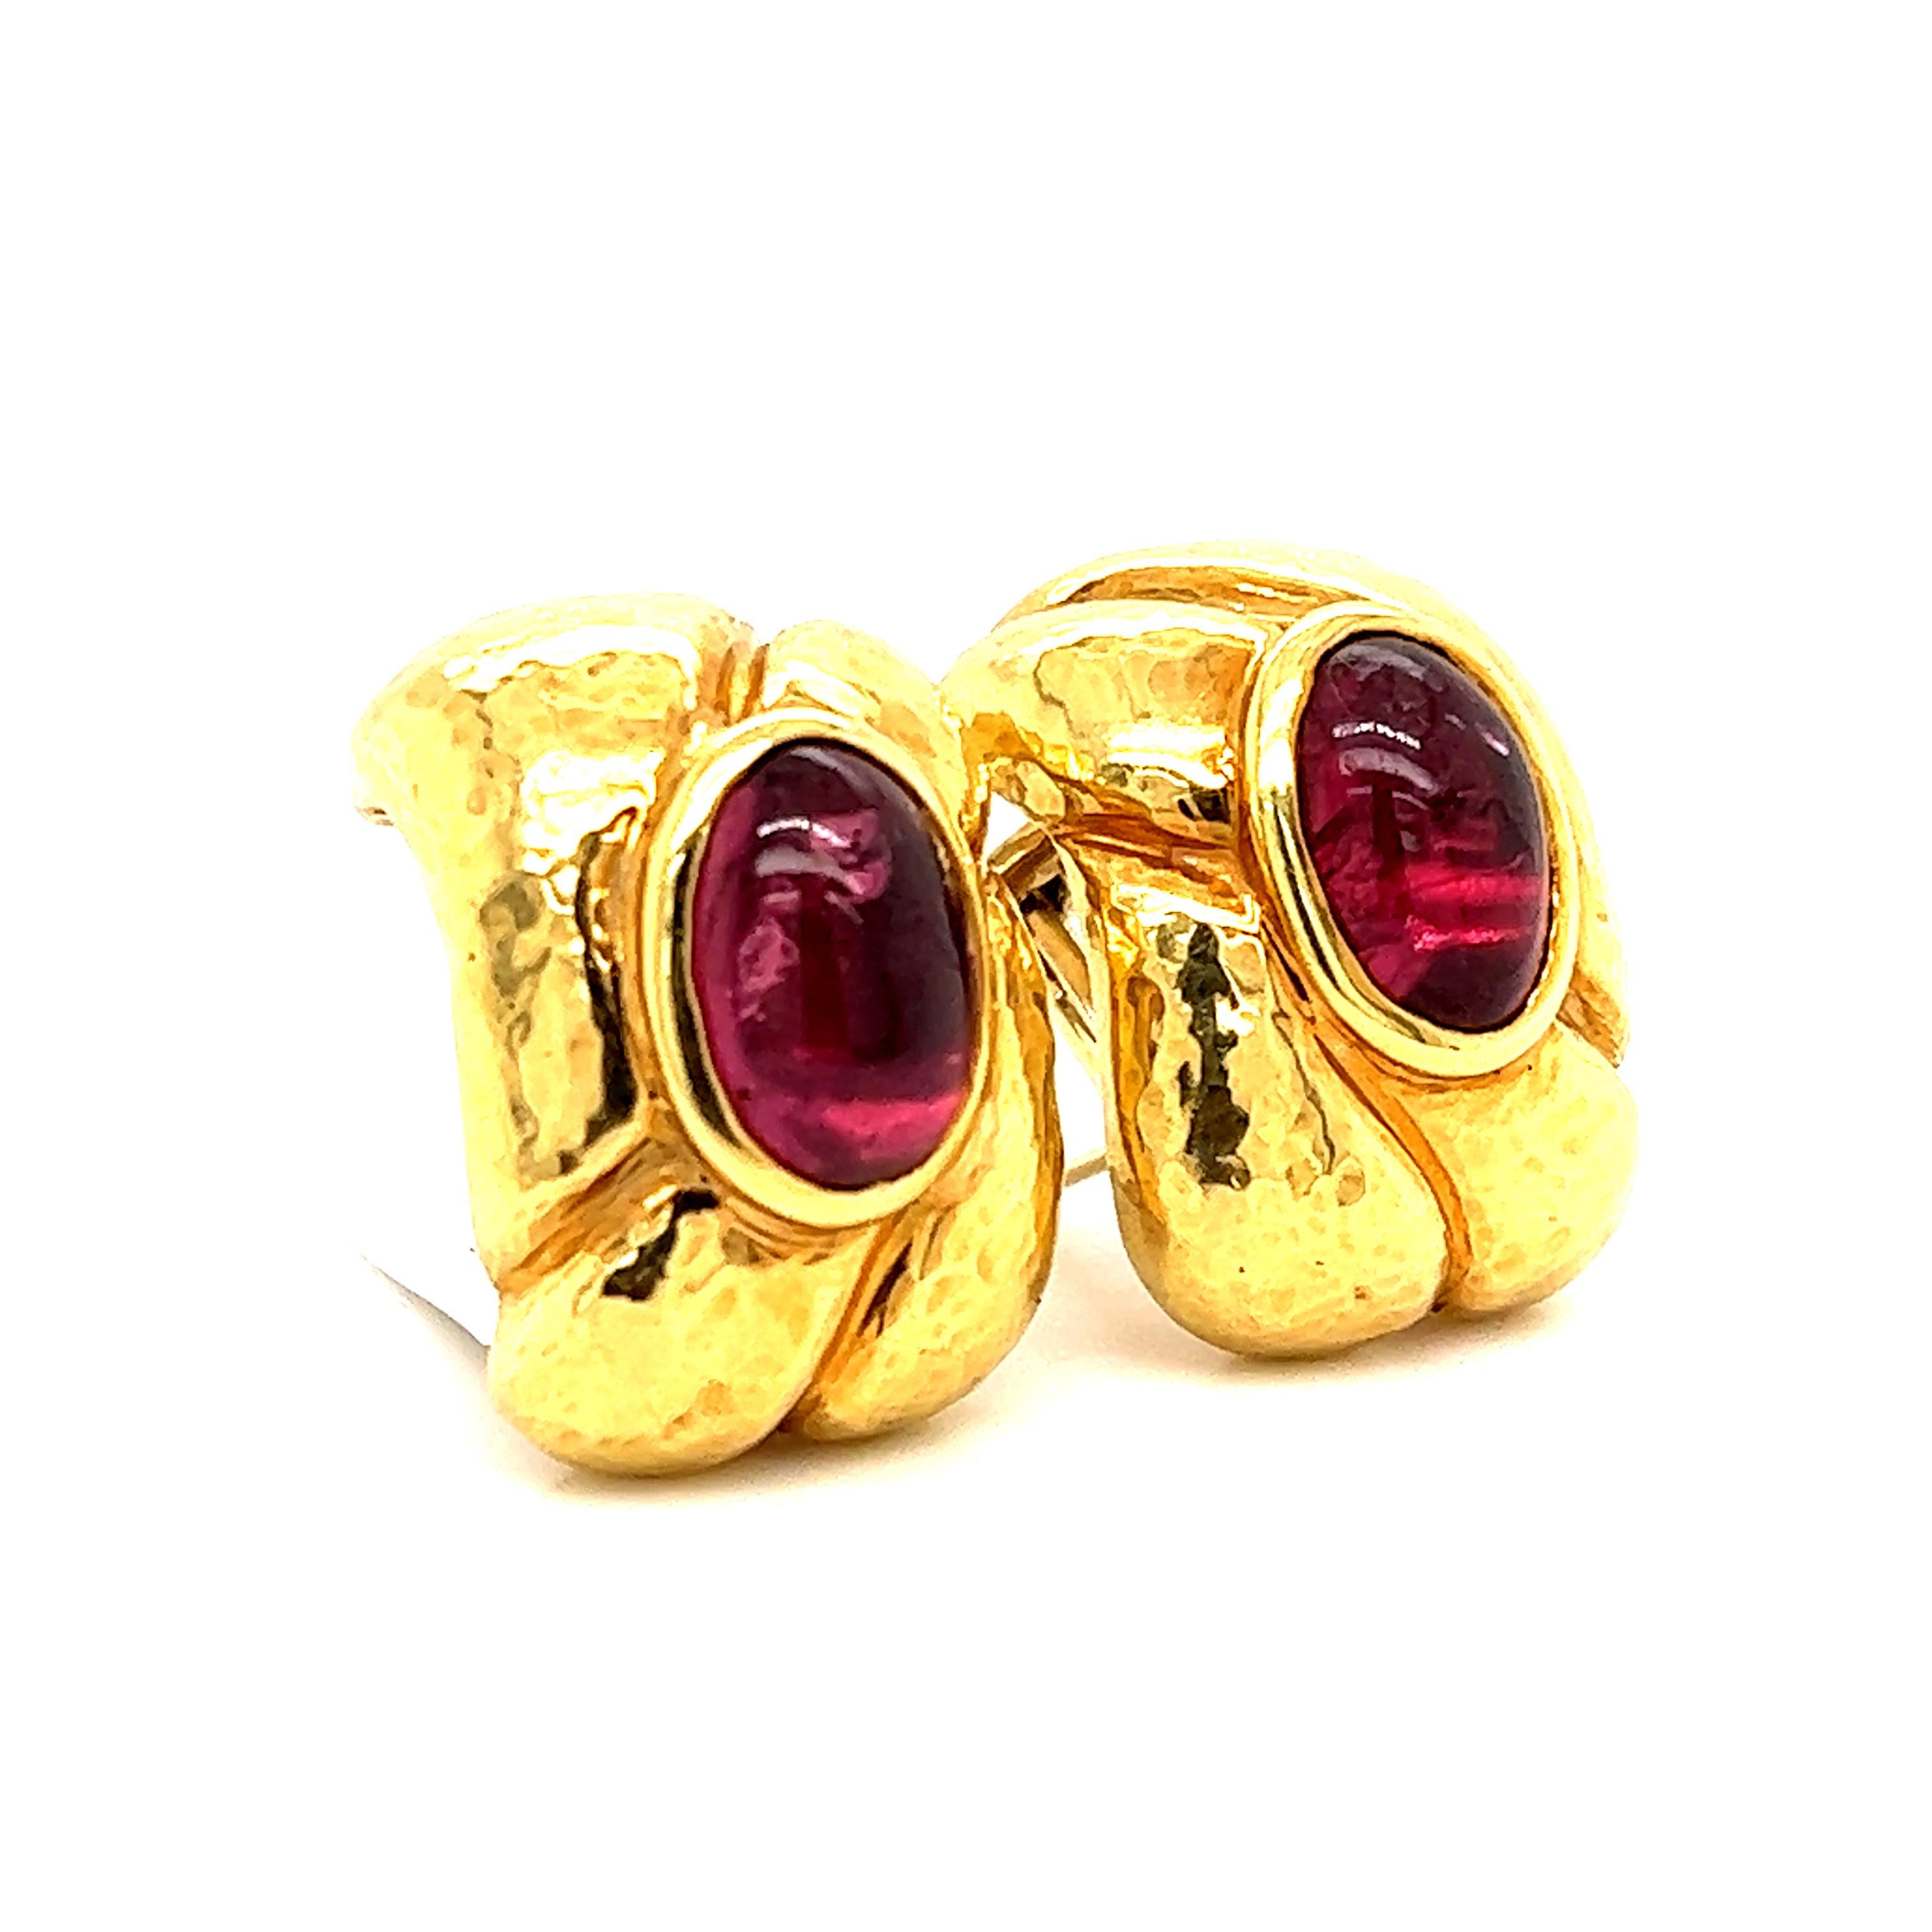 Gorgeous appeal on this retro pair of 18k yellow gold earrings. Highlighting the pair are two cabochon cut pink tourmaline gemstones that display a rich pink tone that contrast perfectly against the yellow gold design. The gemstones are bezel set